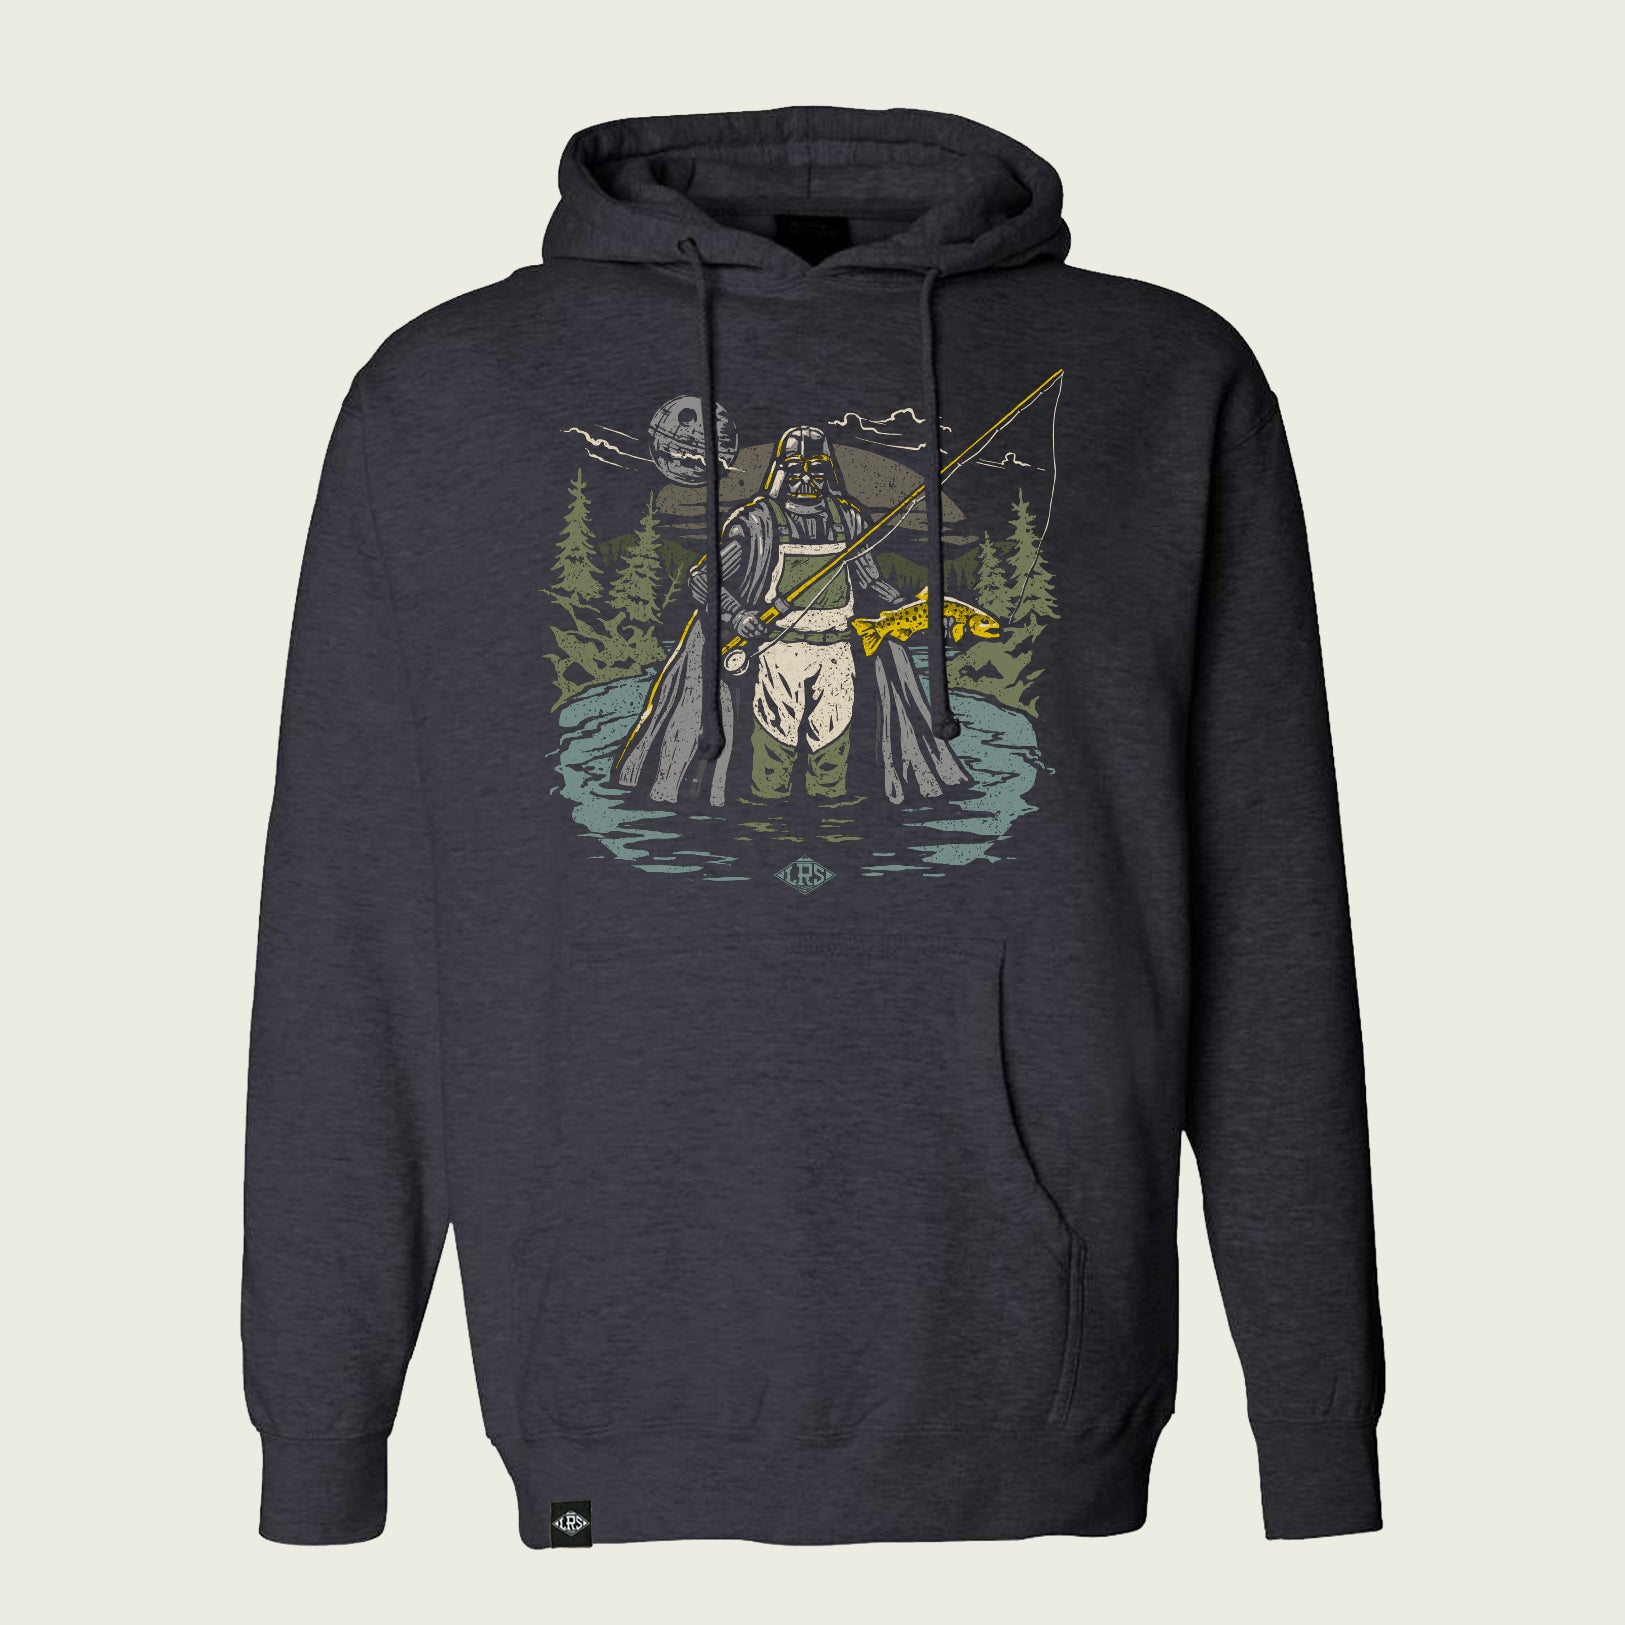 12895-582-ks-solar-tech-hoody-aruba-front_s20-lowres_plp - Duranglers Fly  Fishing Shop & Guides